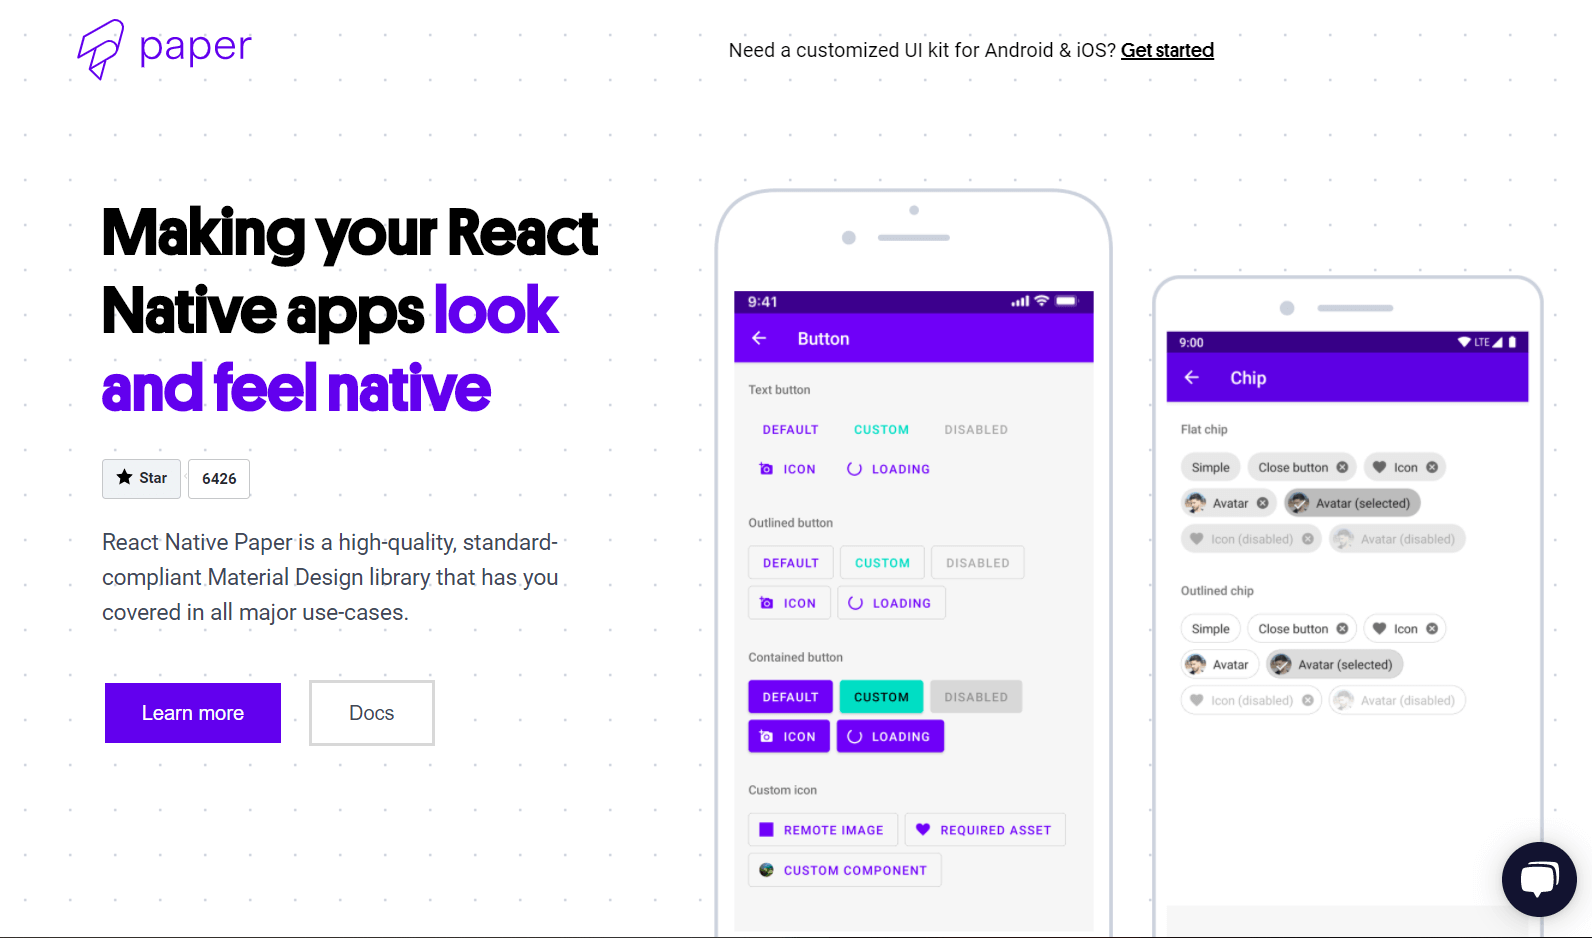 The homepage of React Native Paper